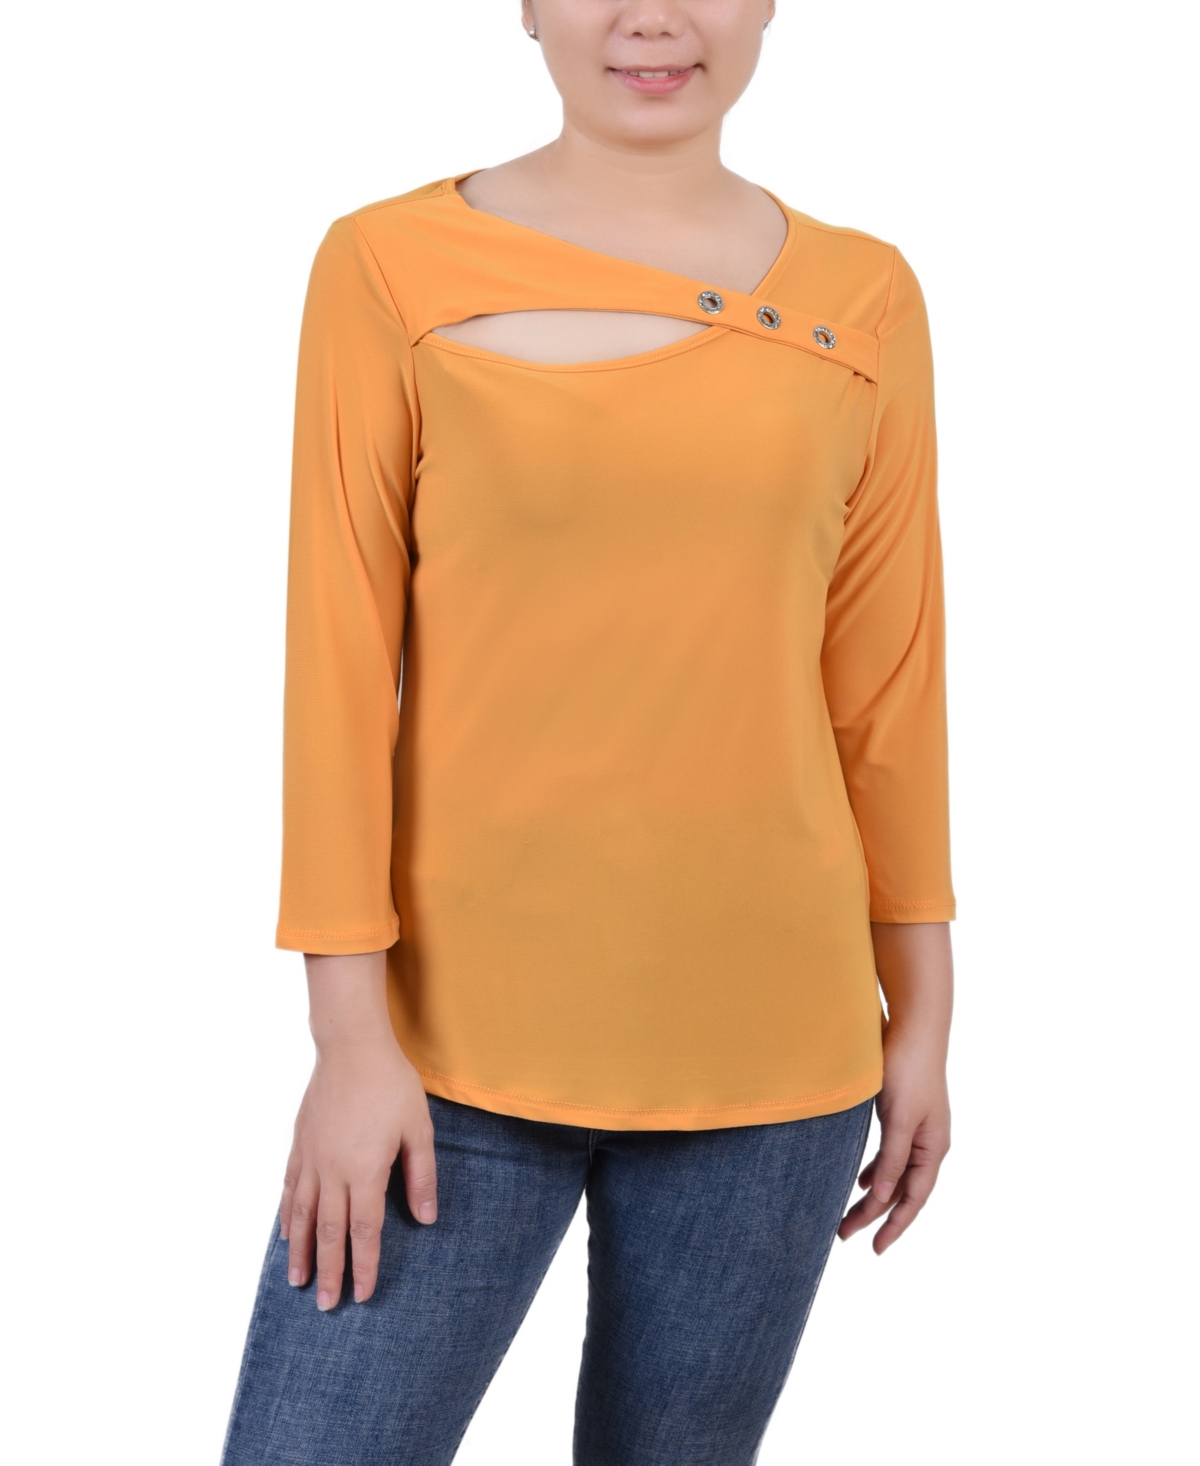 Women's 3/4 Sleeve Cutout Top - Spice Route